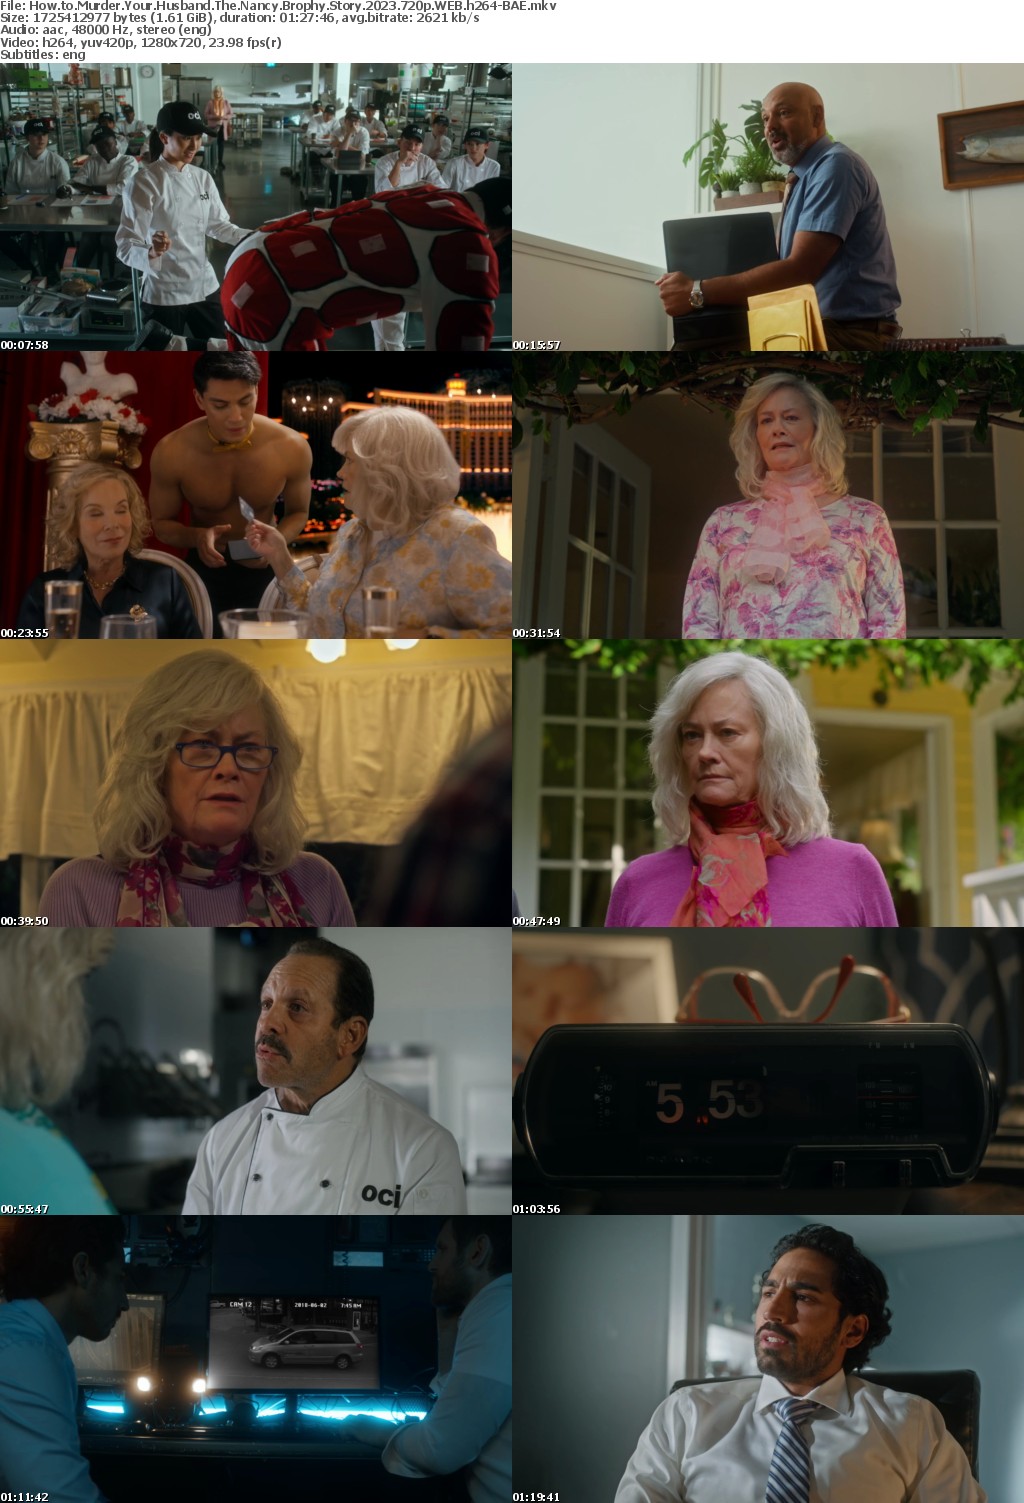 How to Murder Your Husband The Nancy Brophy Story 2023 720p WEB h264-BAE